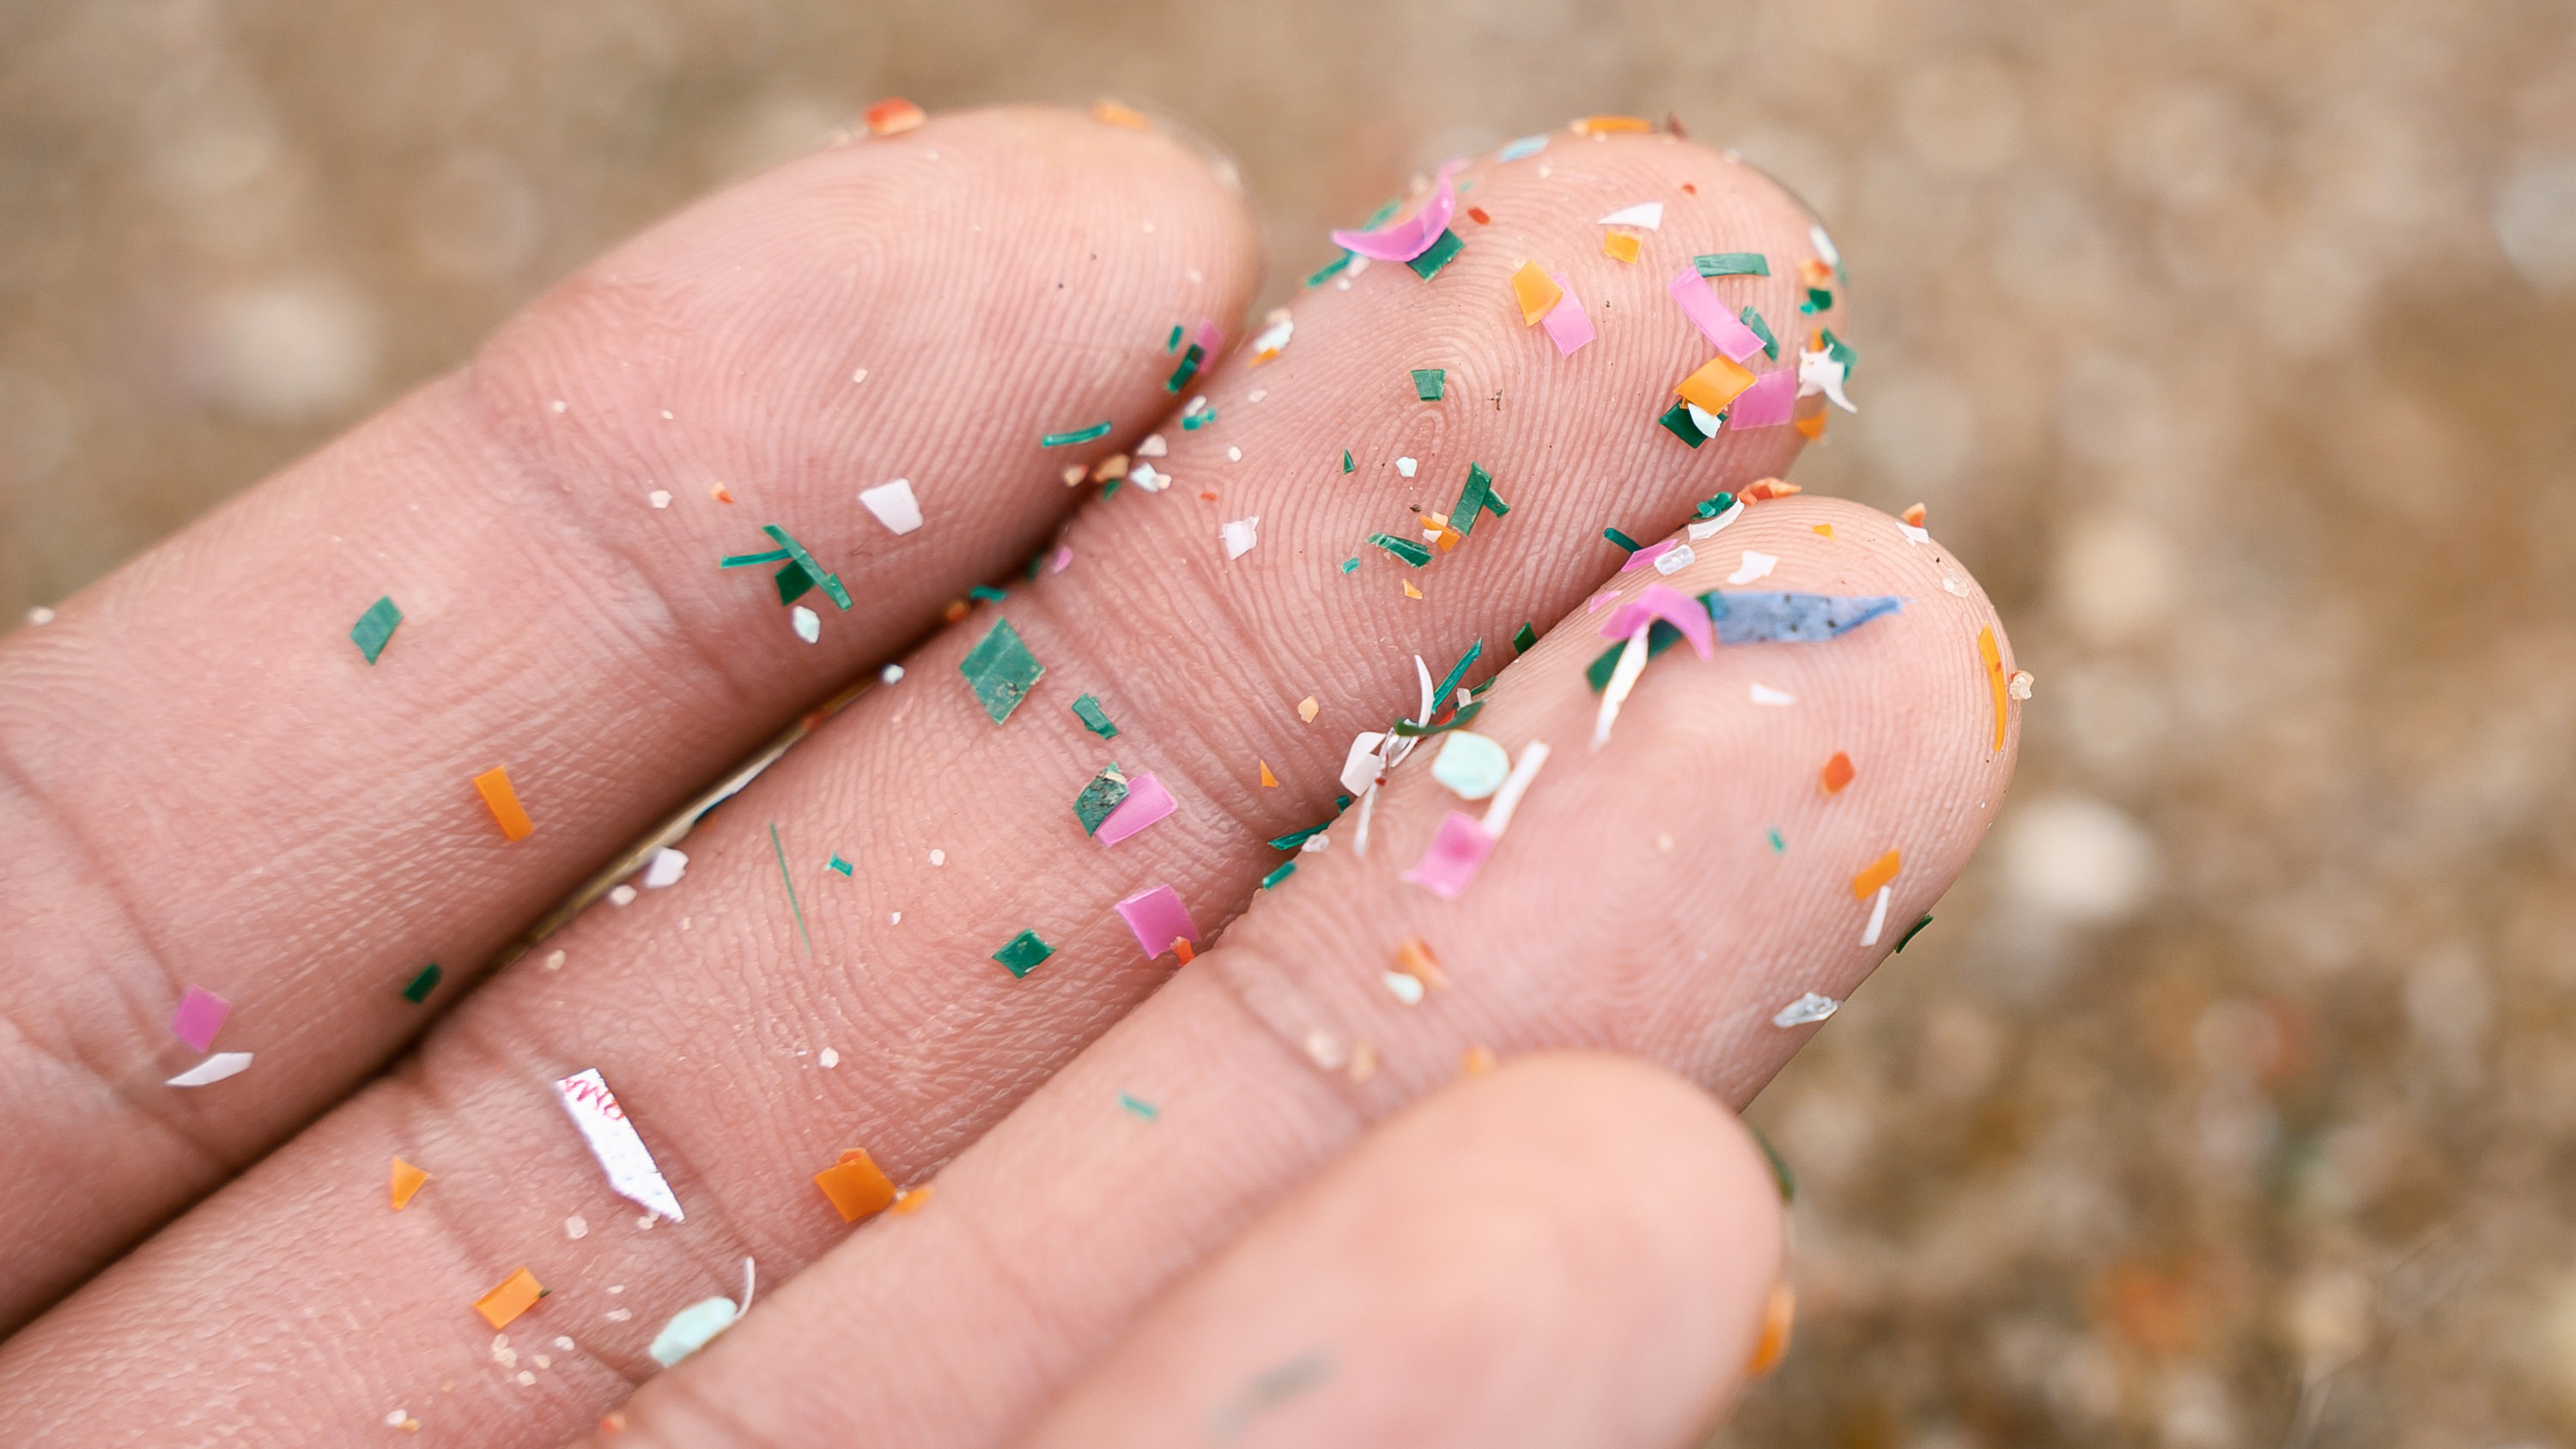 Microplastic fragments on a person&#039;s fingers